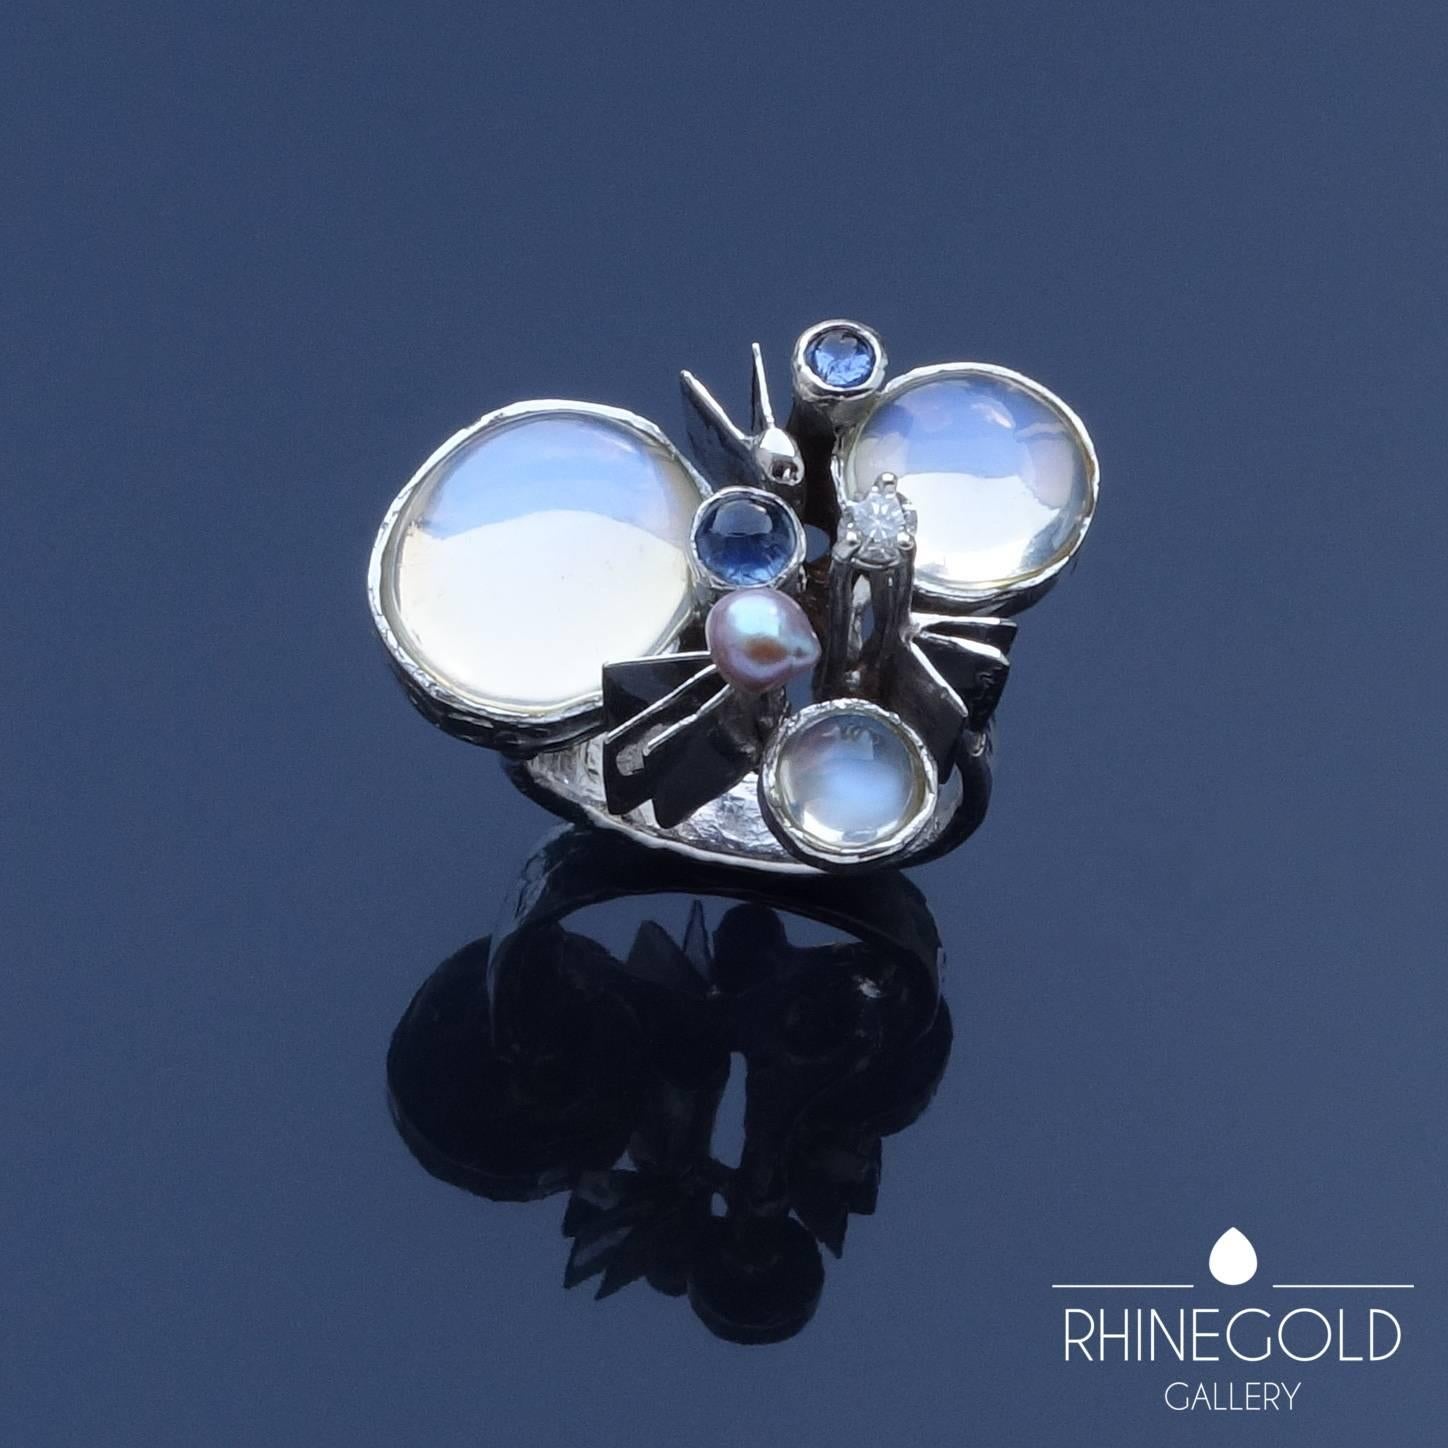 Klaus Neubauer: Modernist Sculptural Moonstone Sapphire Diamond Pearl White Gold Ring
14k white gold, moonstone, sapphire, brilliant cut diamond, oriental pearl
Ring head: 2.9 cm to 2.2 cm (approx. 1 1/8" to 7/8"); height 1.75 cm